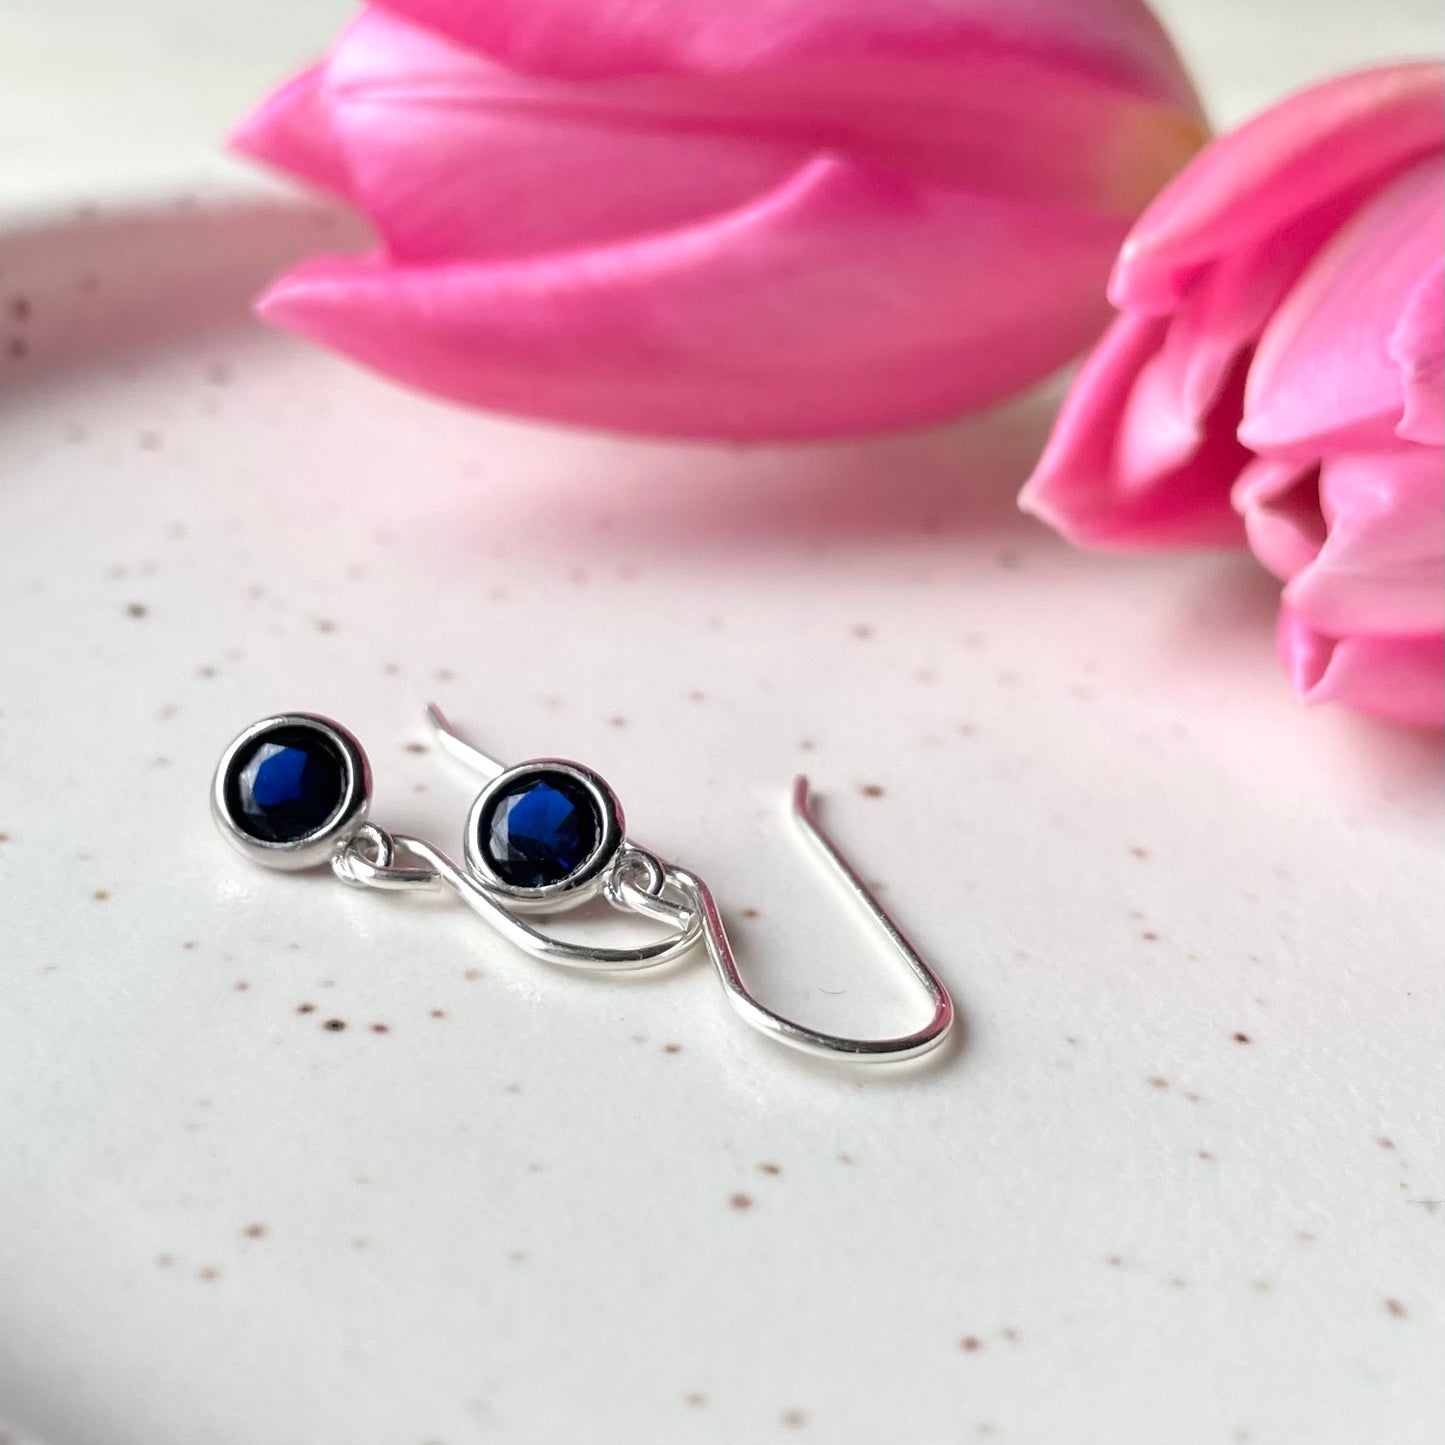 September birthstone earrings. Sterling silver and cubic zirconia in sapphire blue colour. Made in Canada by Wallis Designs.